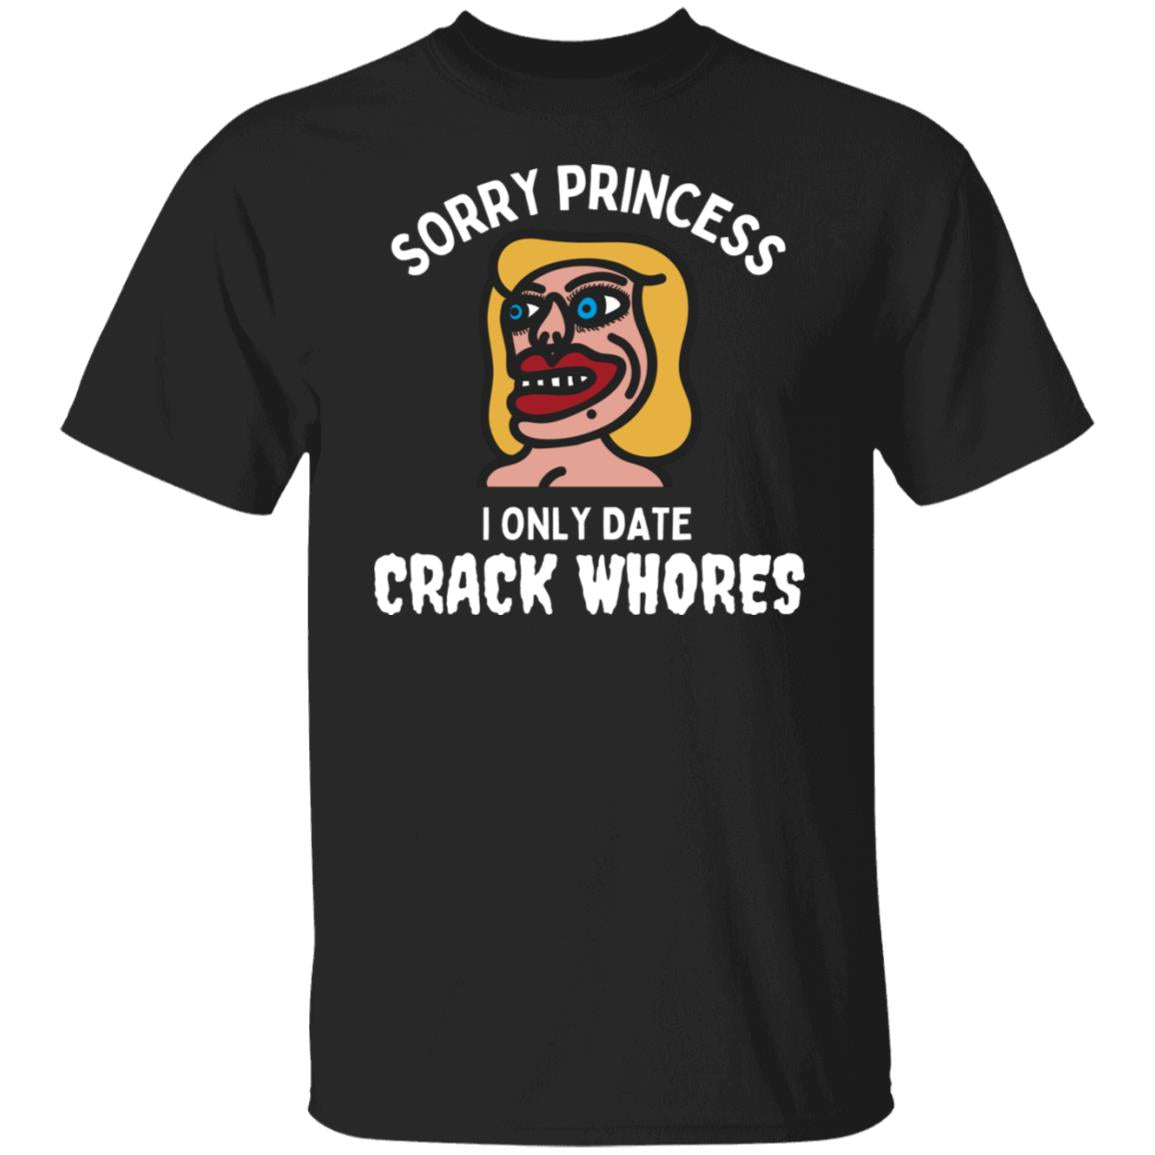 Sorry Princess I Only Date Crack Heads Adult Humor Graphic Tee T-Shirt